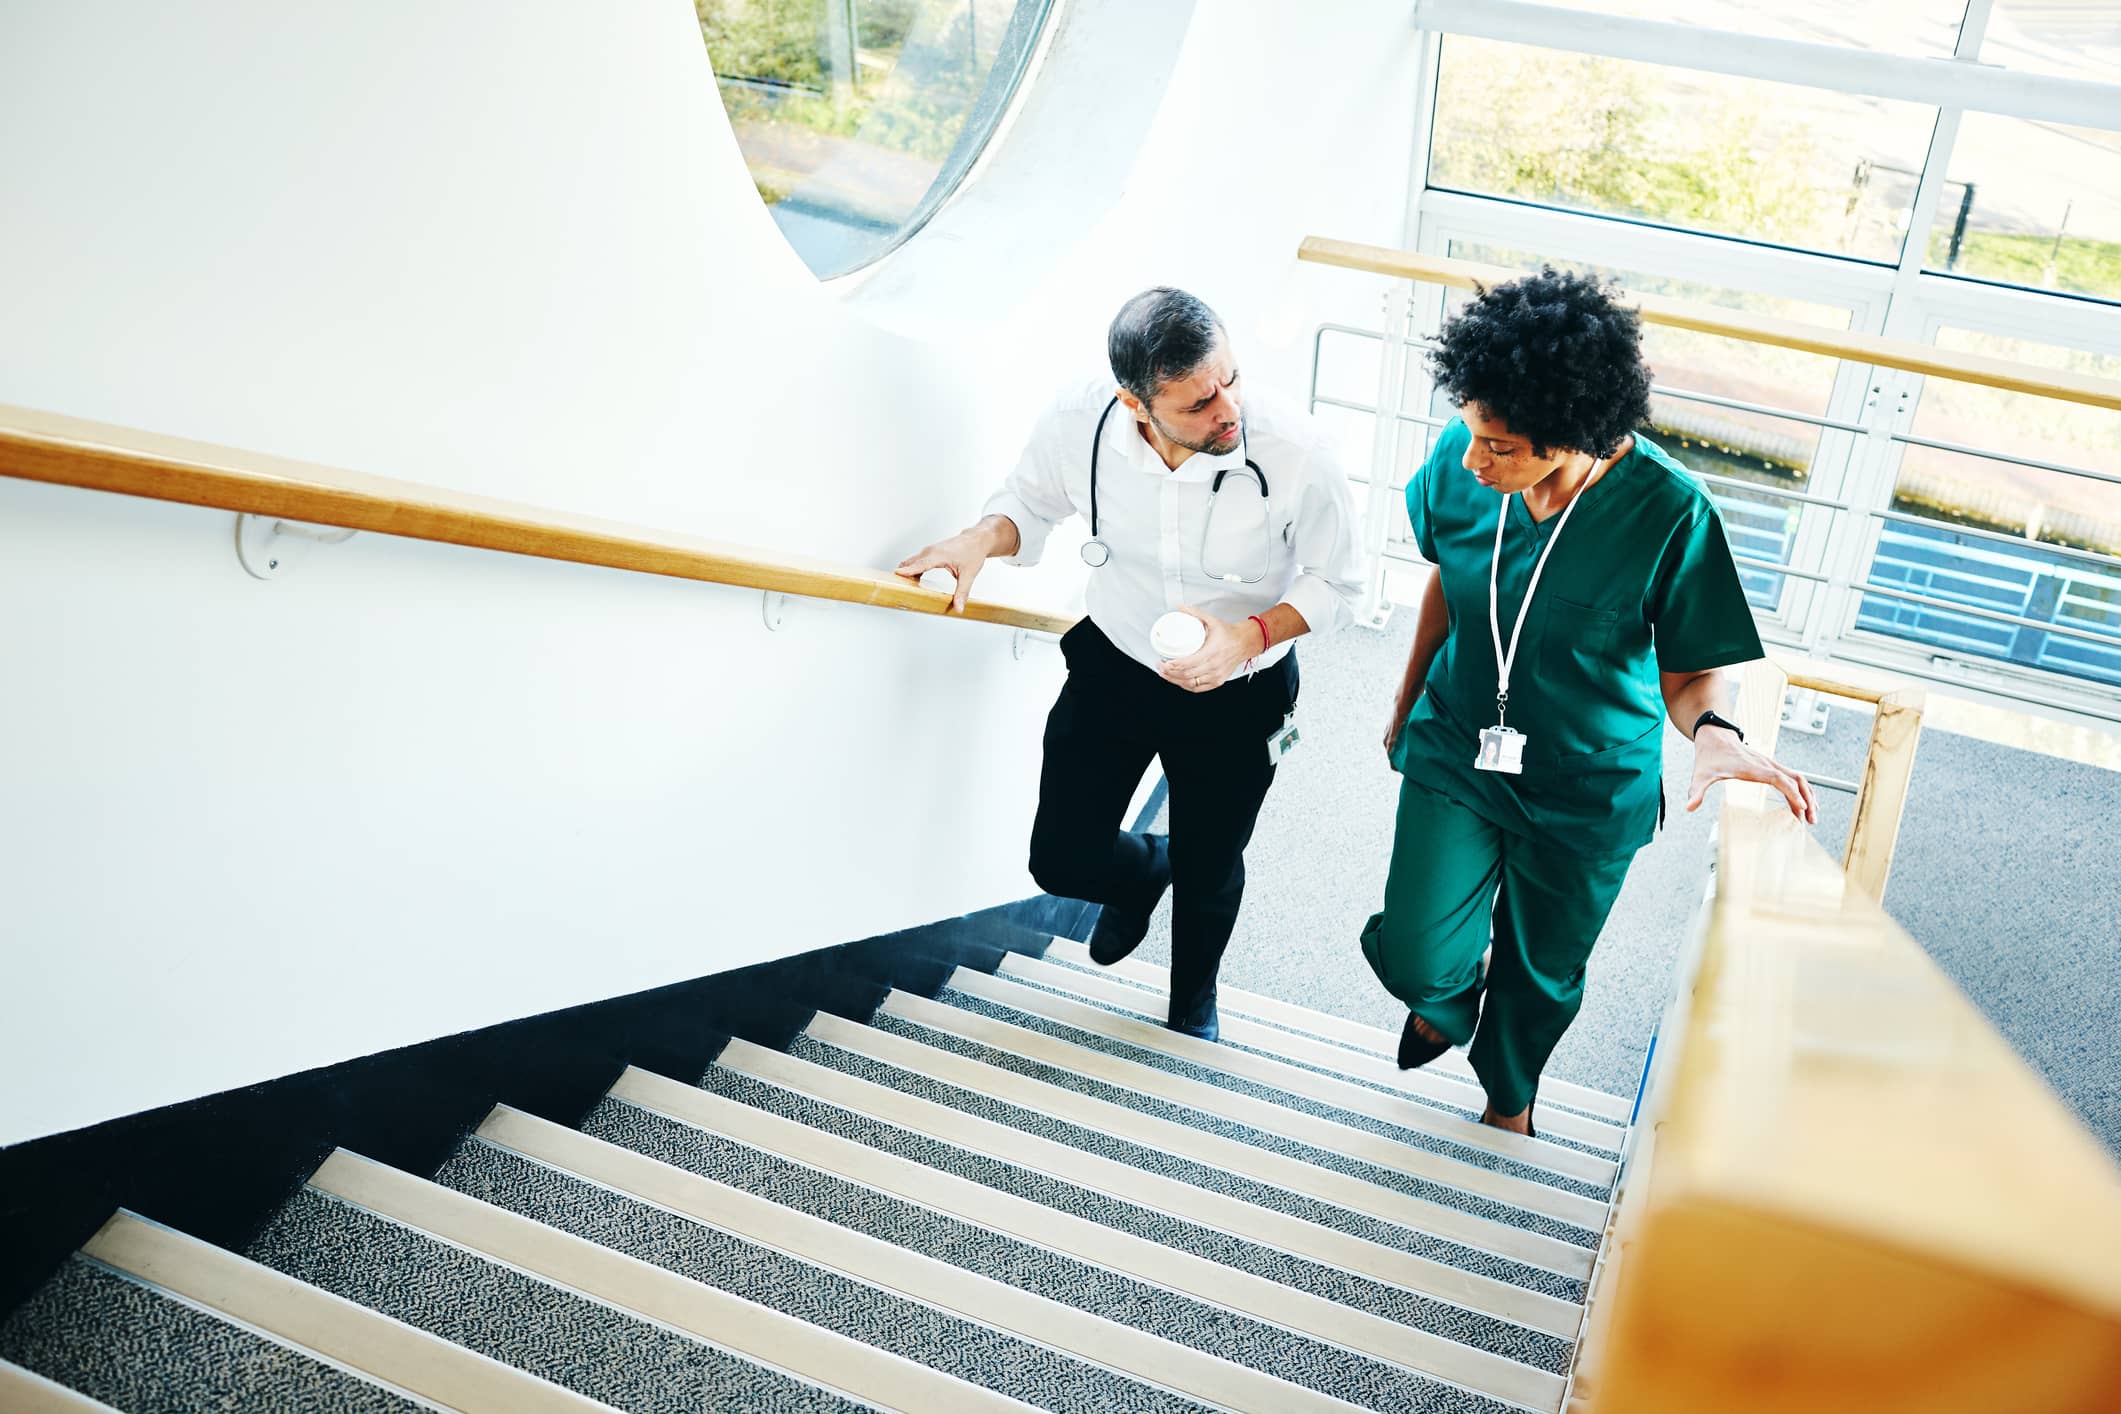 Two doctors walking up a stairs. Autocratic leadership is appropriate in the medical field.